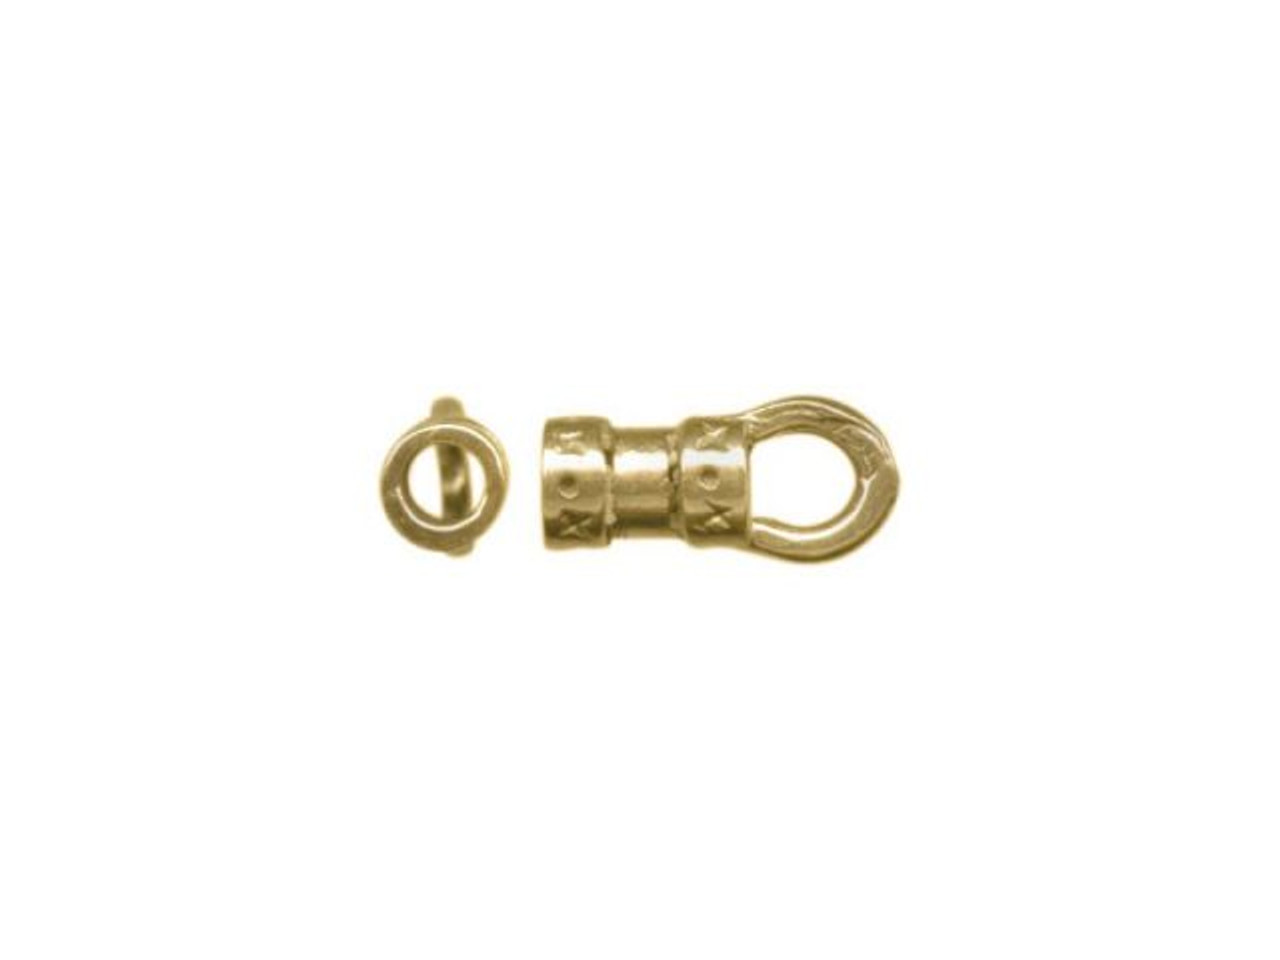 Wholesale Copper Crimp Cord Ends for Jewelry Making - TierraCast